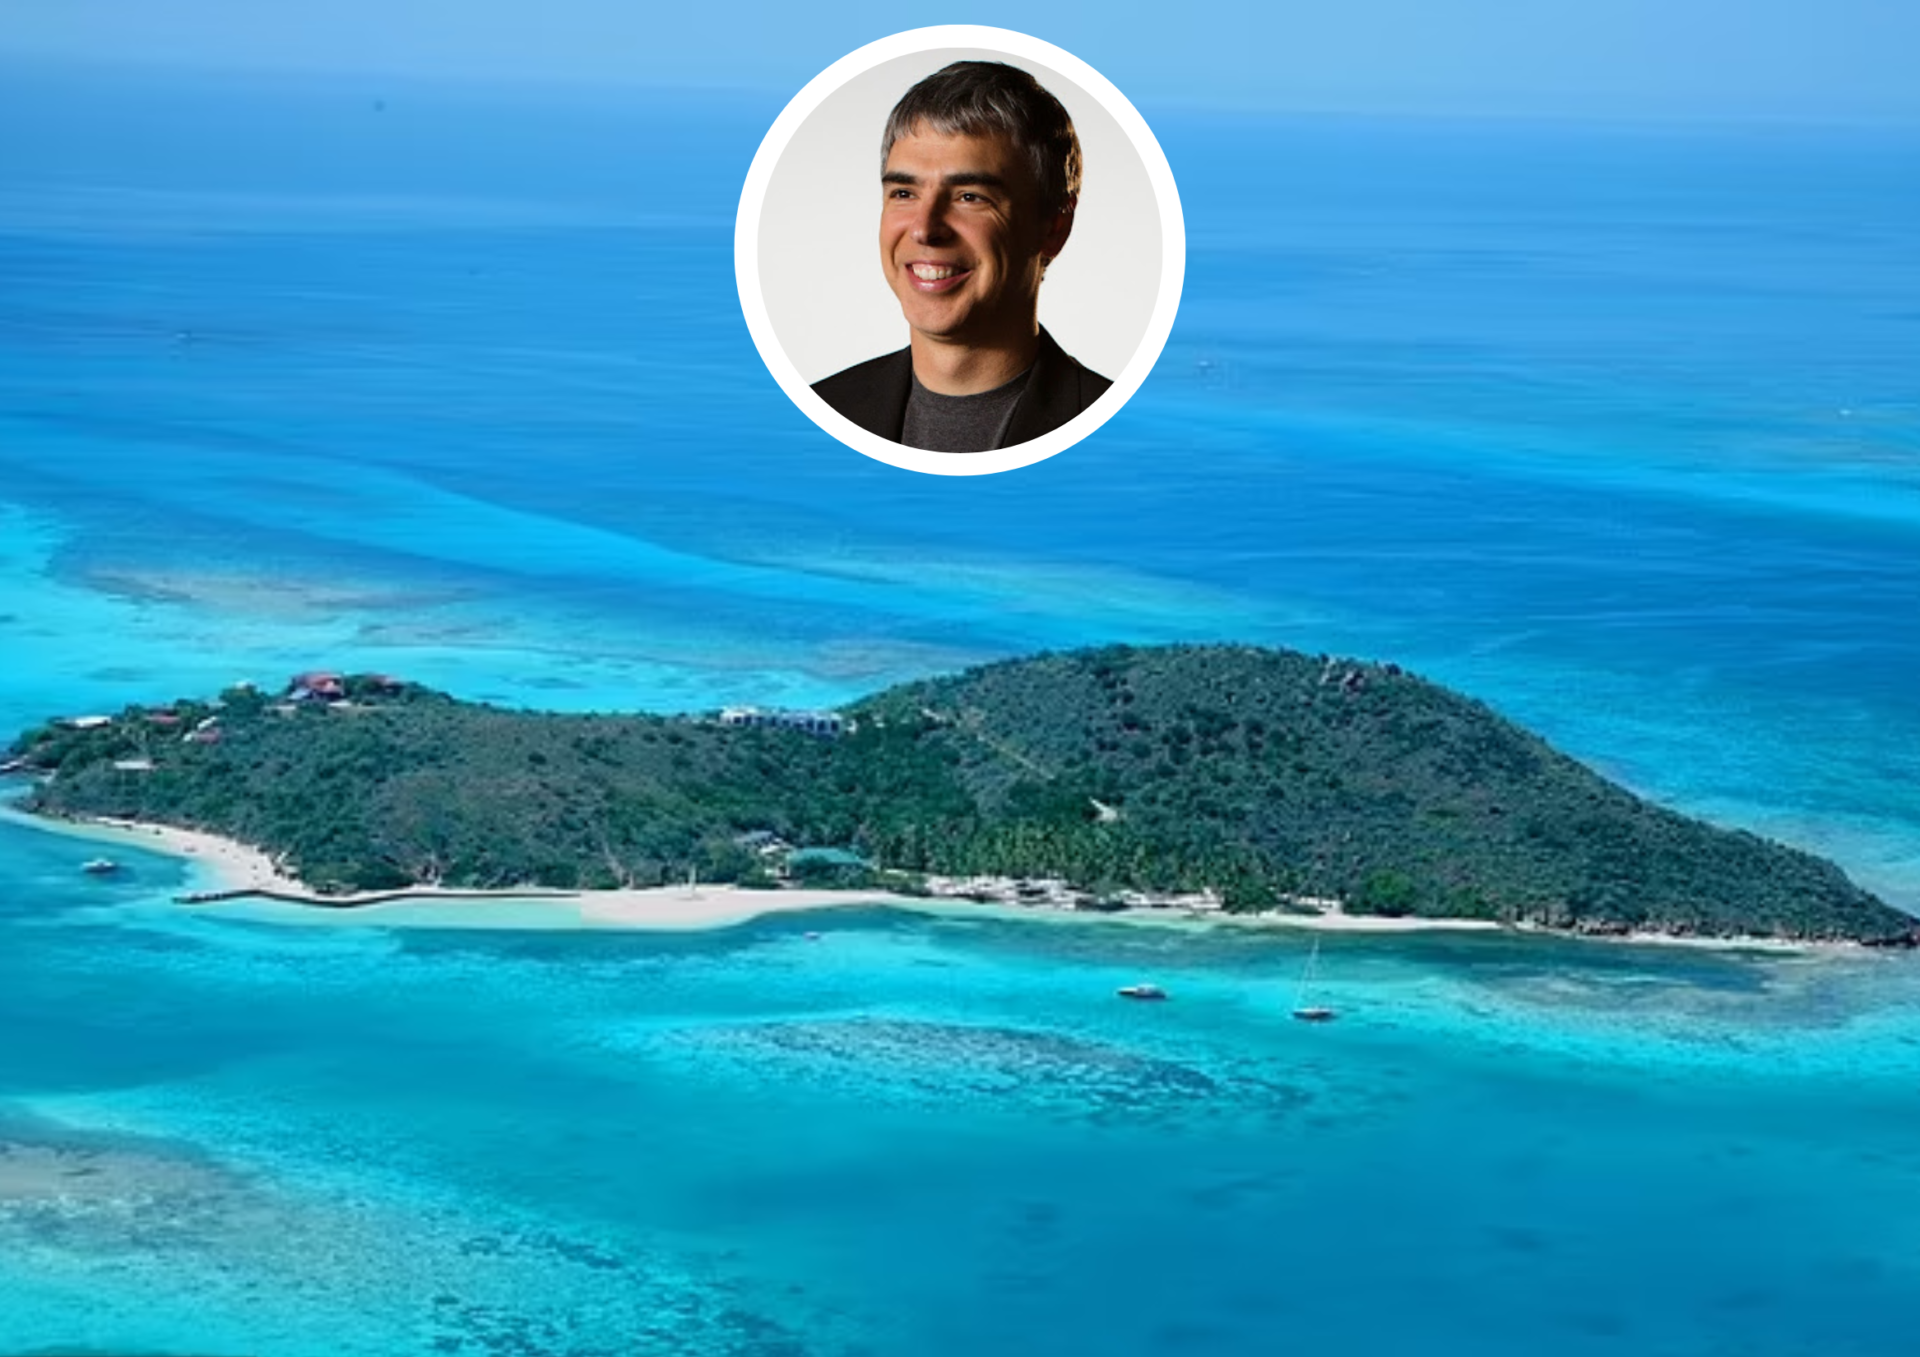 Google Co-Founders Private Island